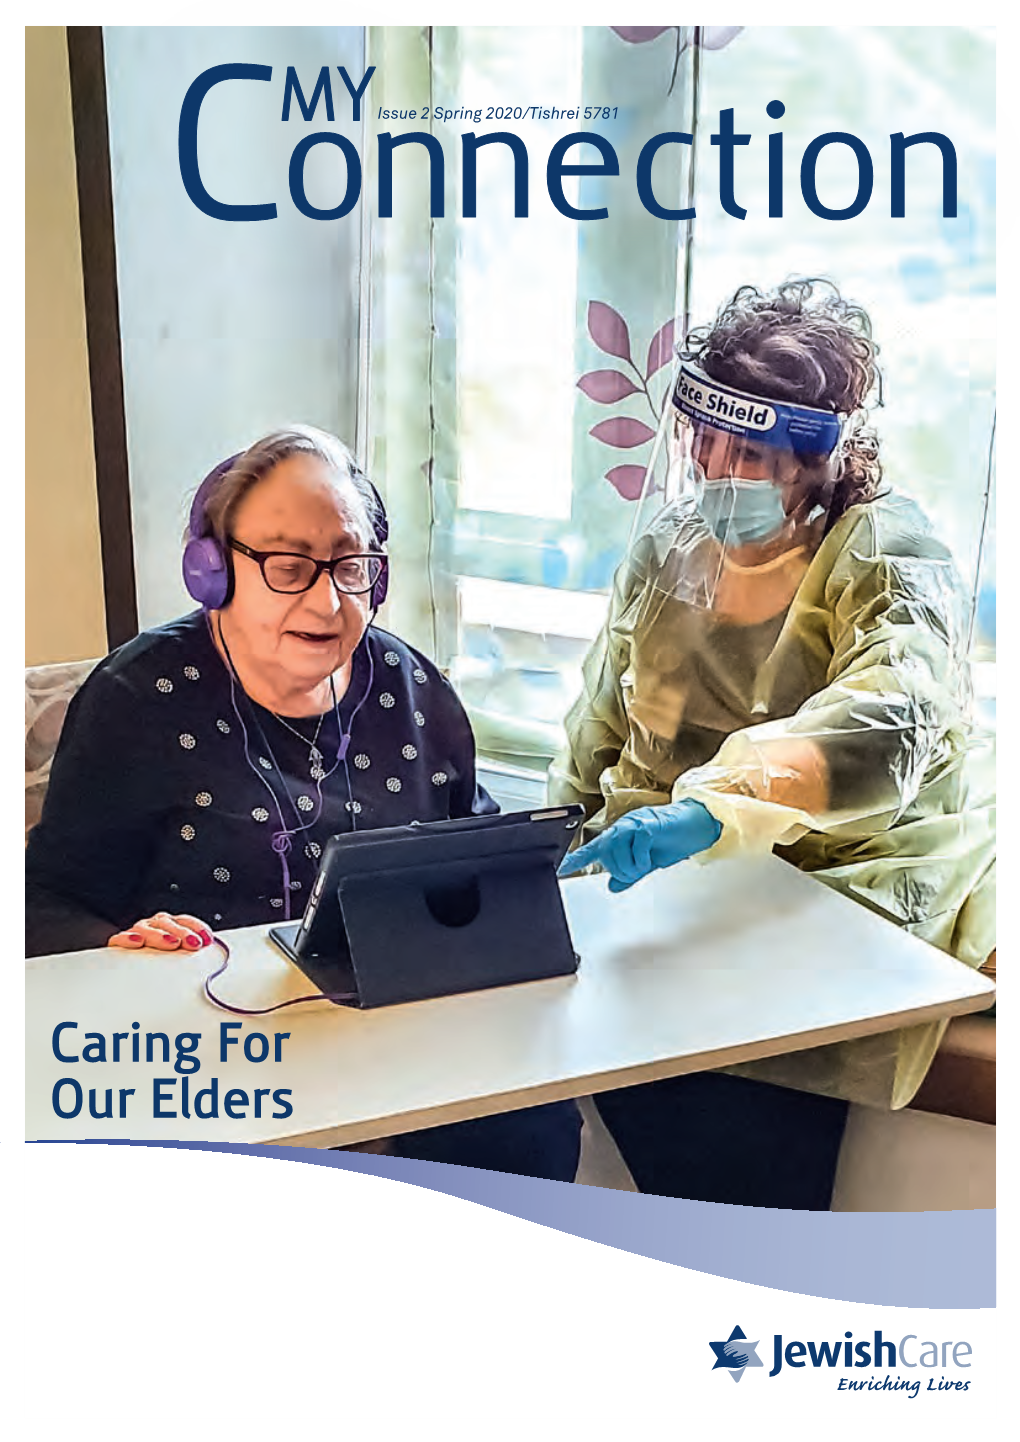 Caring for Our Elders MESSAGE from OUR PRESIDENT and CEO INBOX